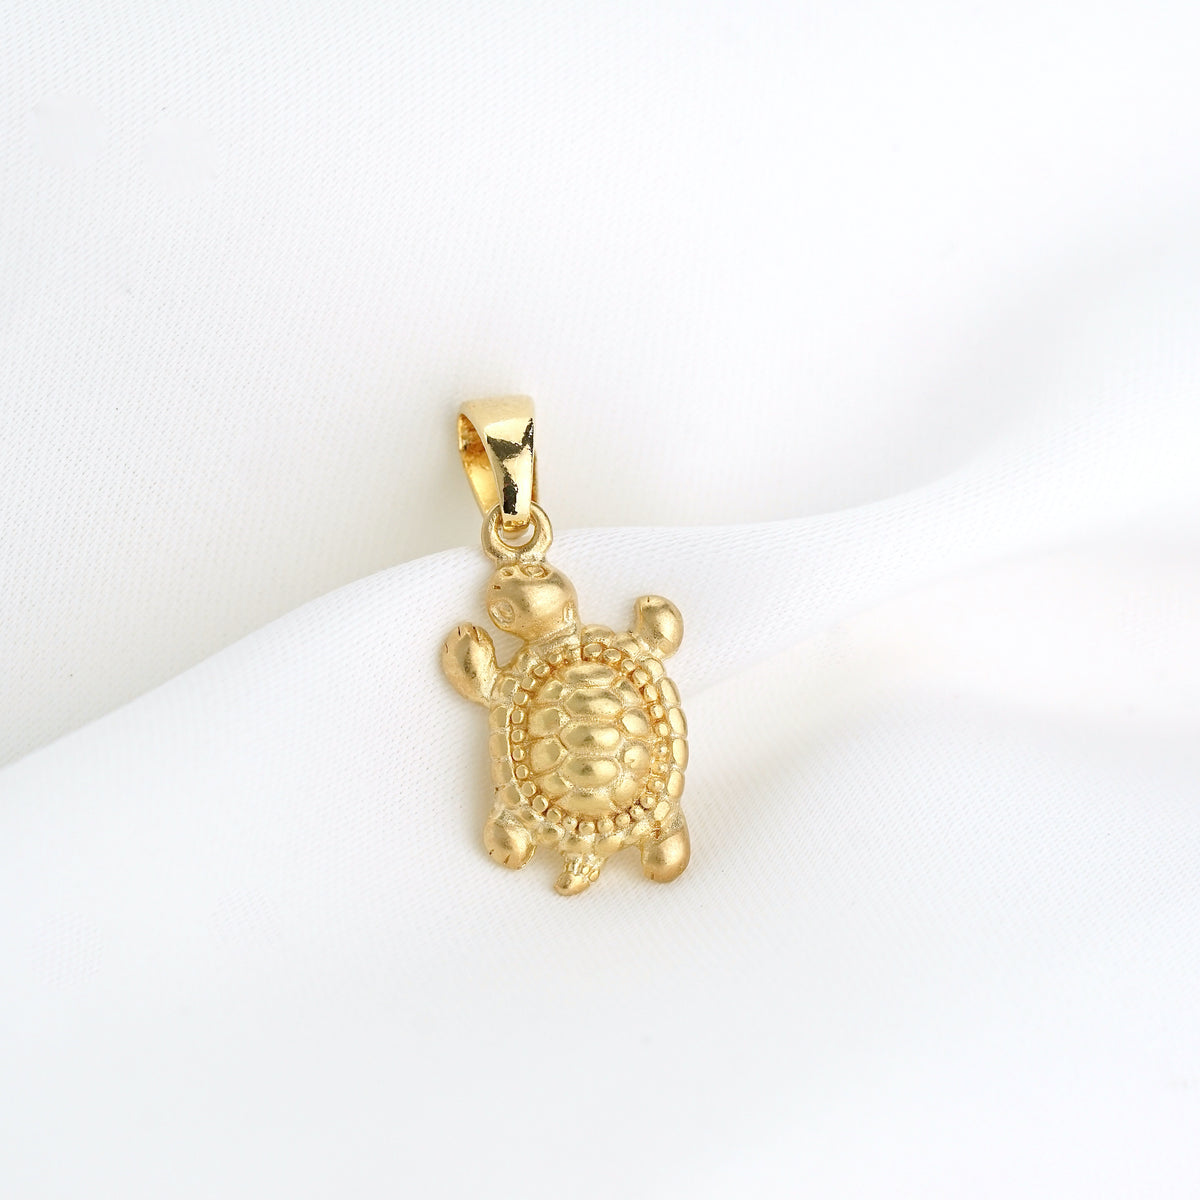 Small Golden Turtle Necklace